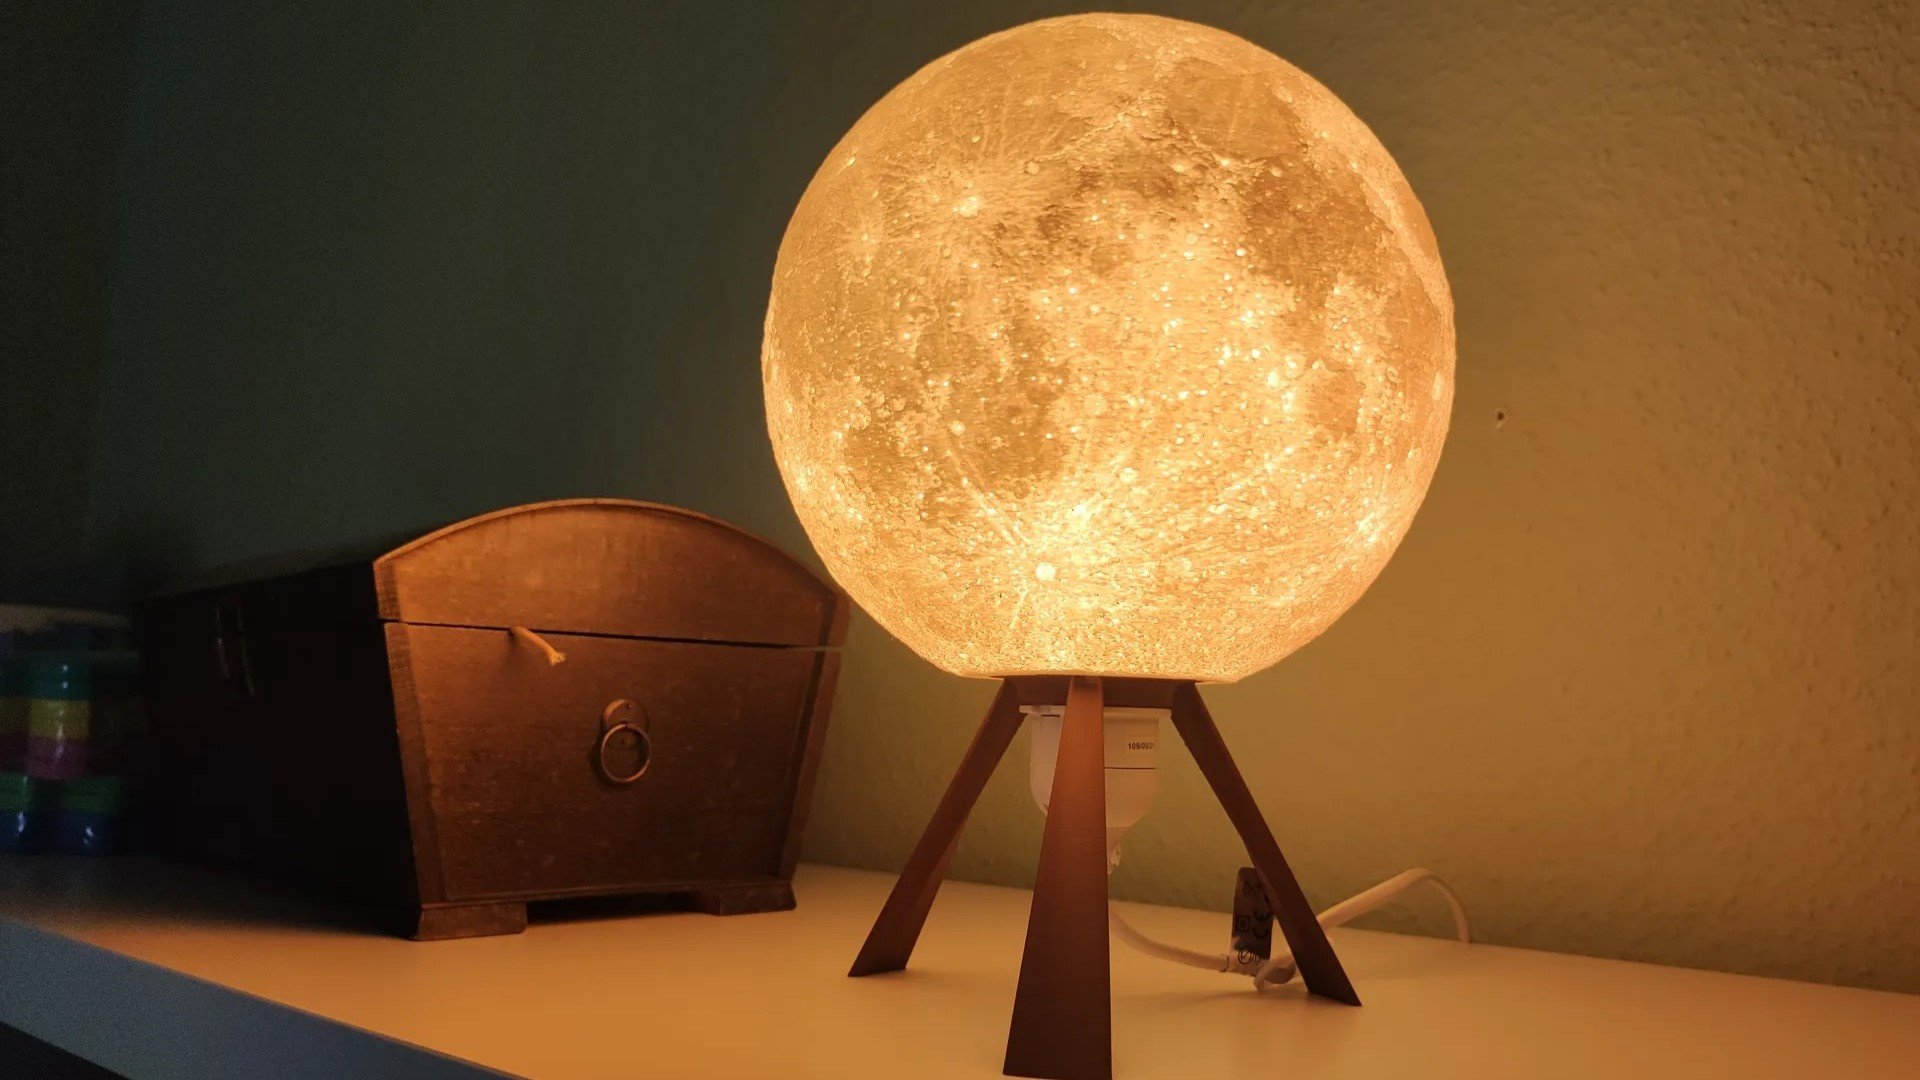 3D Printed Moon: Best STLs for Lamps, Planters, & More